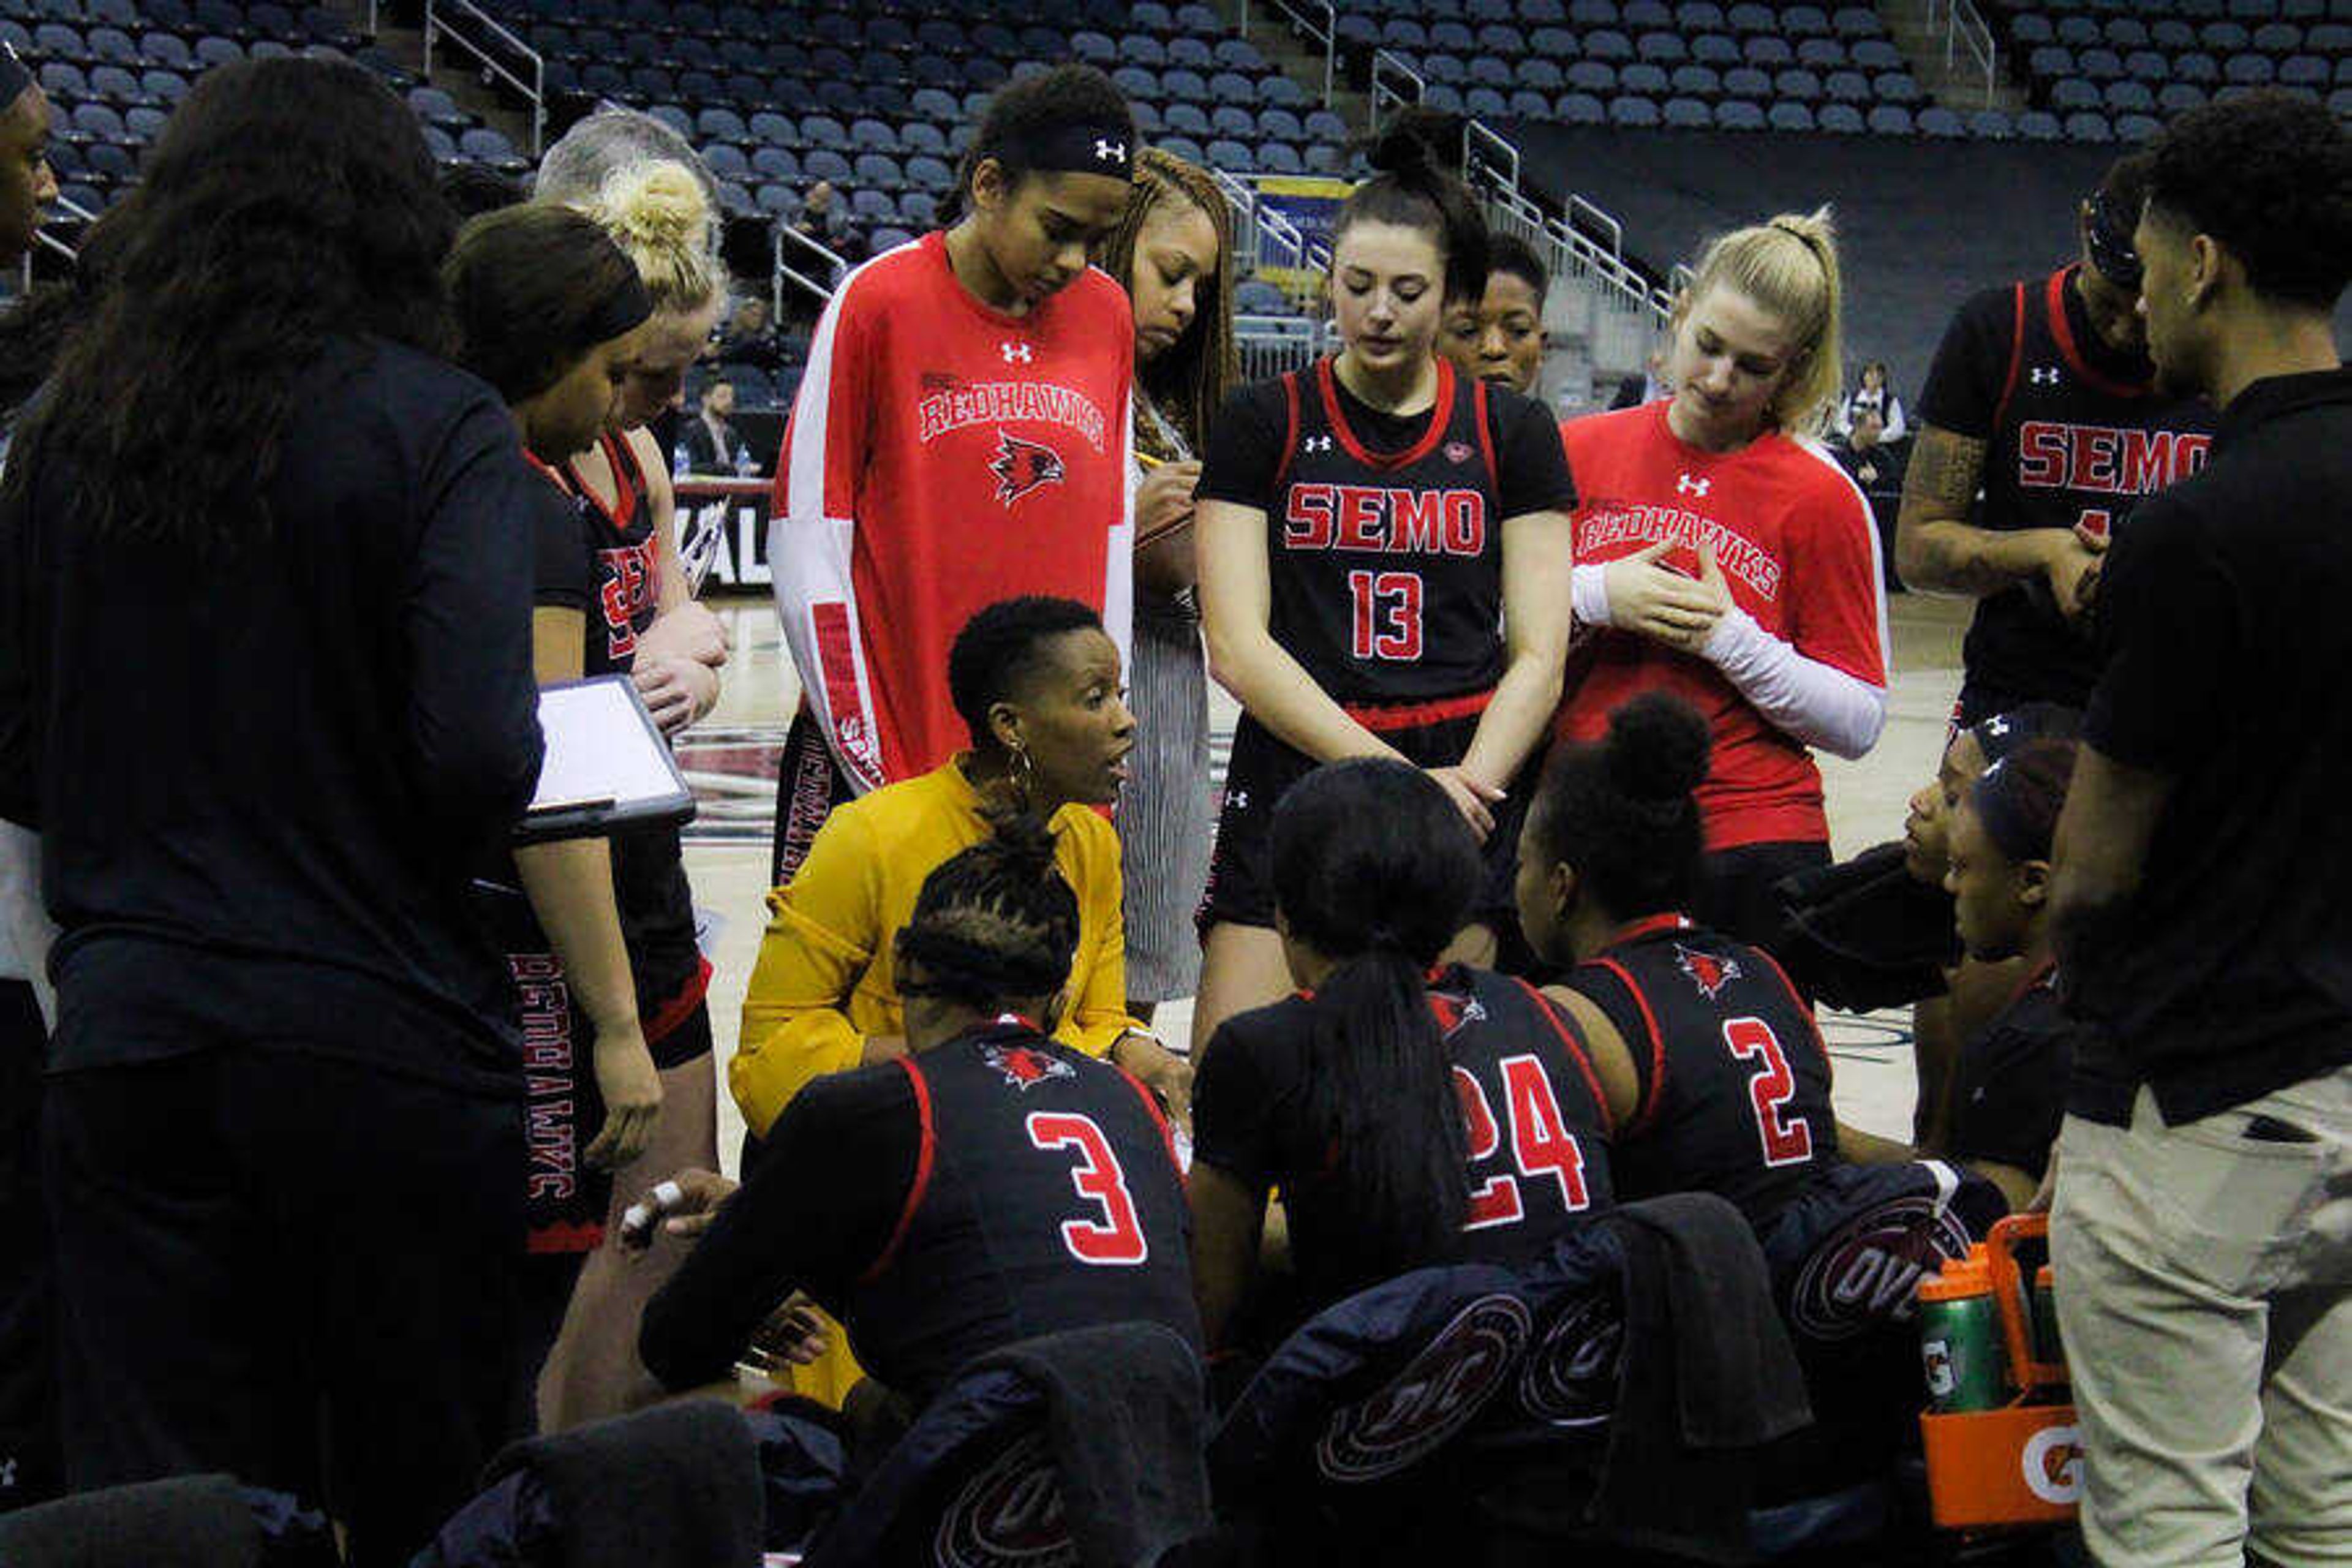 Rekha Patterson instructs her team during a break in the action of their 67-47 win over UT Martin on March 7, 2020 at the Ford Center in Evansville, Indiana.